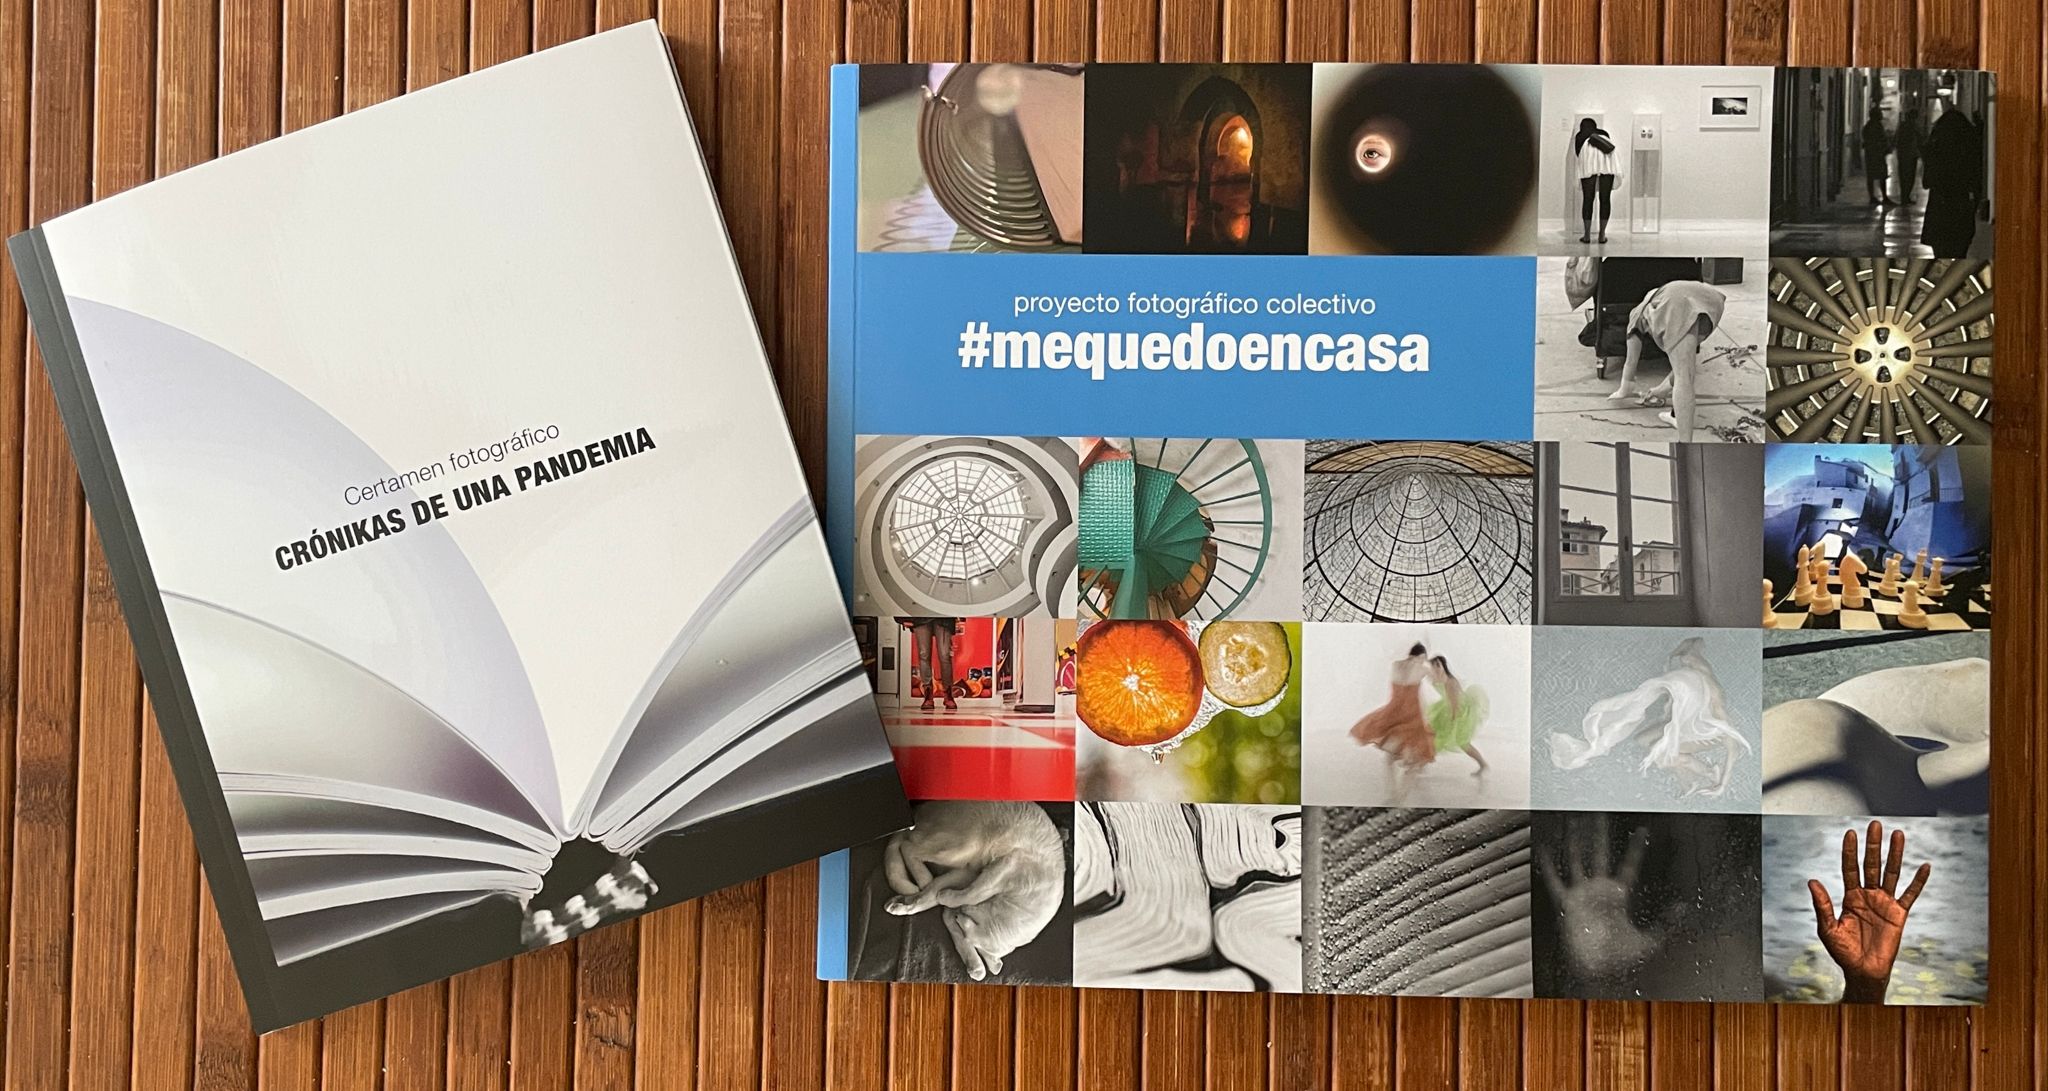 Catalogues by Colectivo Imagen